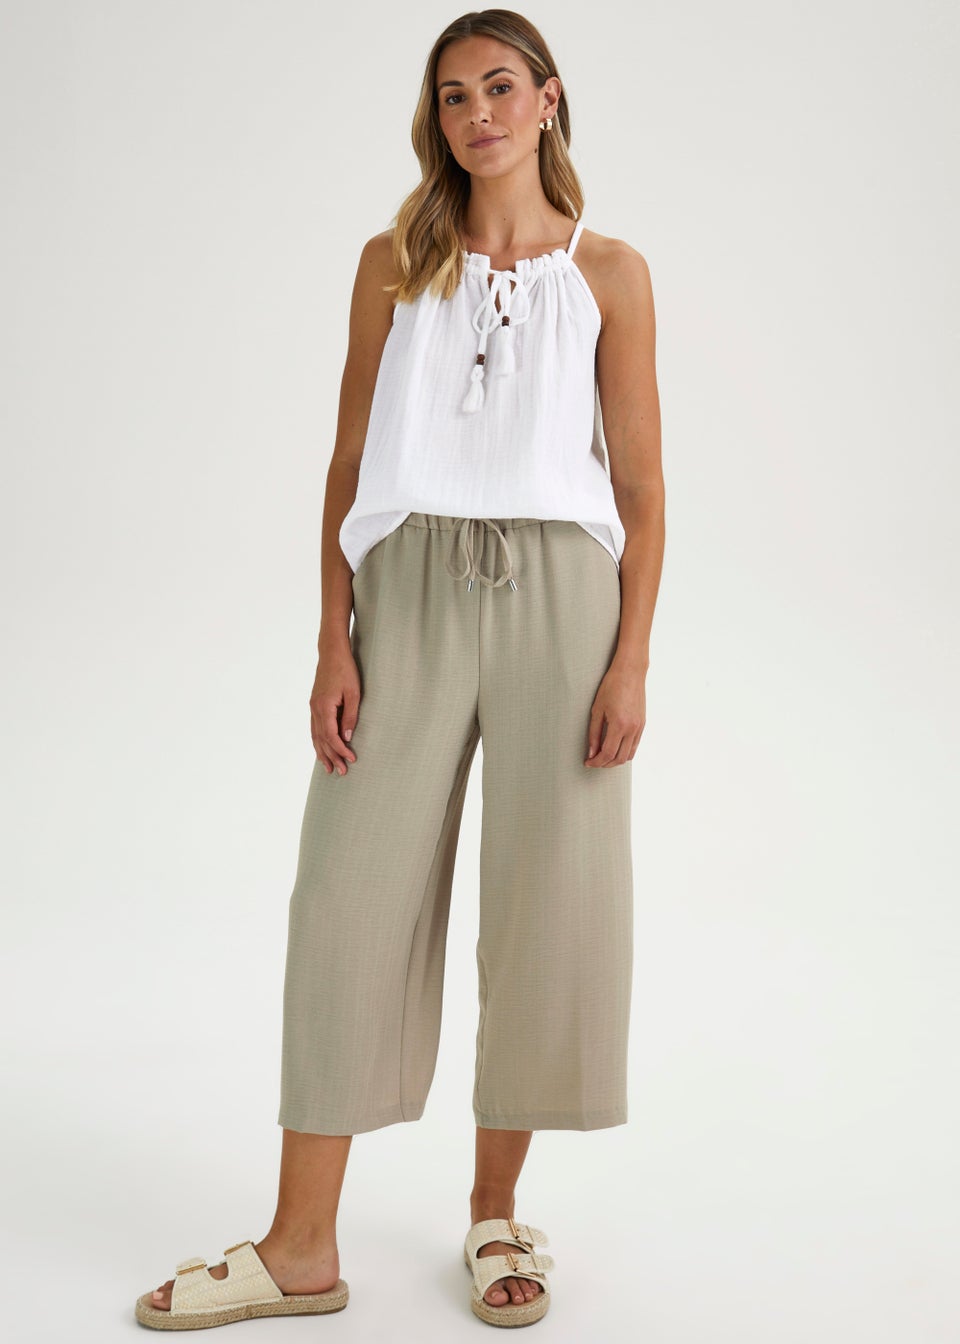 Share more than 83 matalan ladies trousers best - in.cdgdbentre